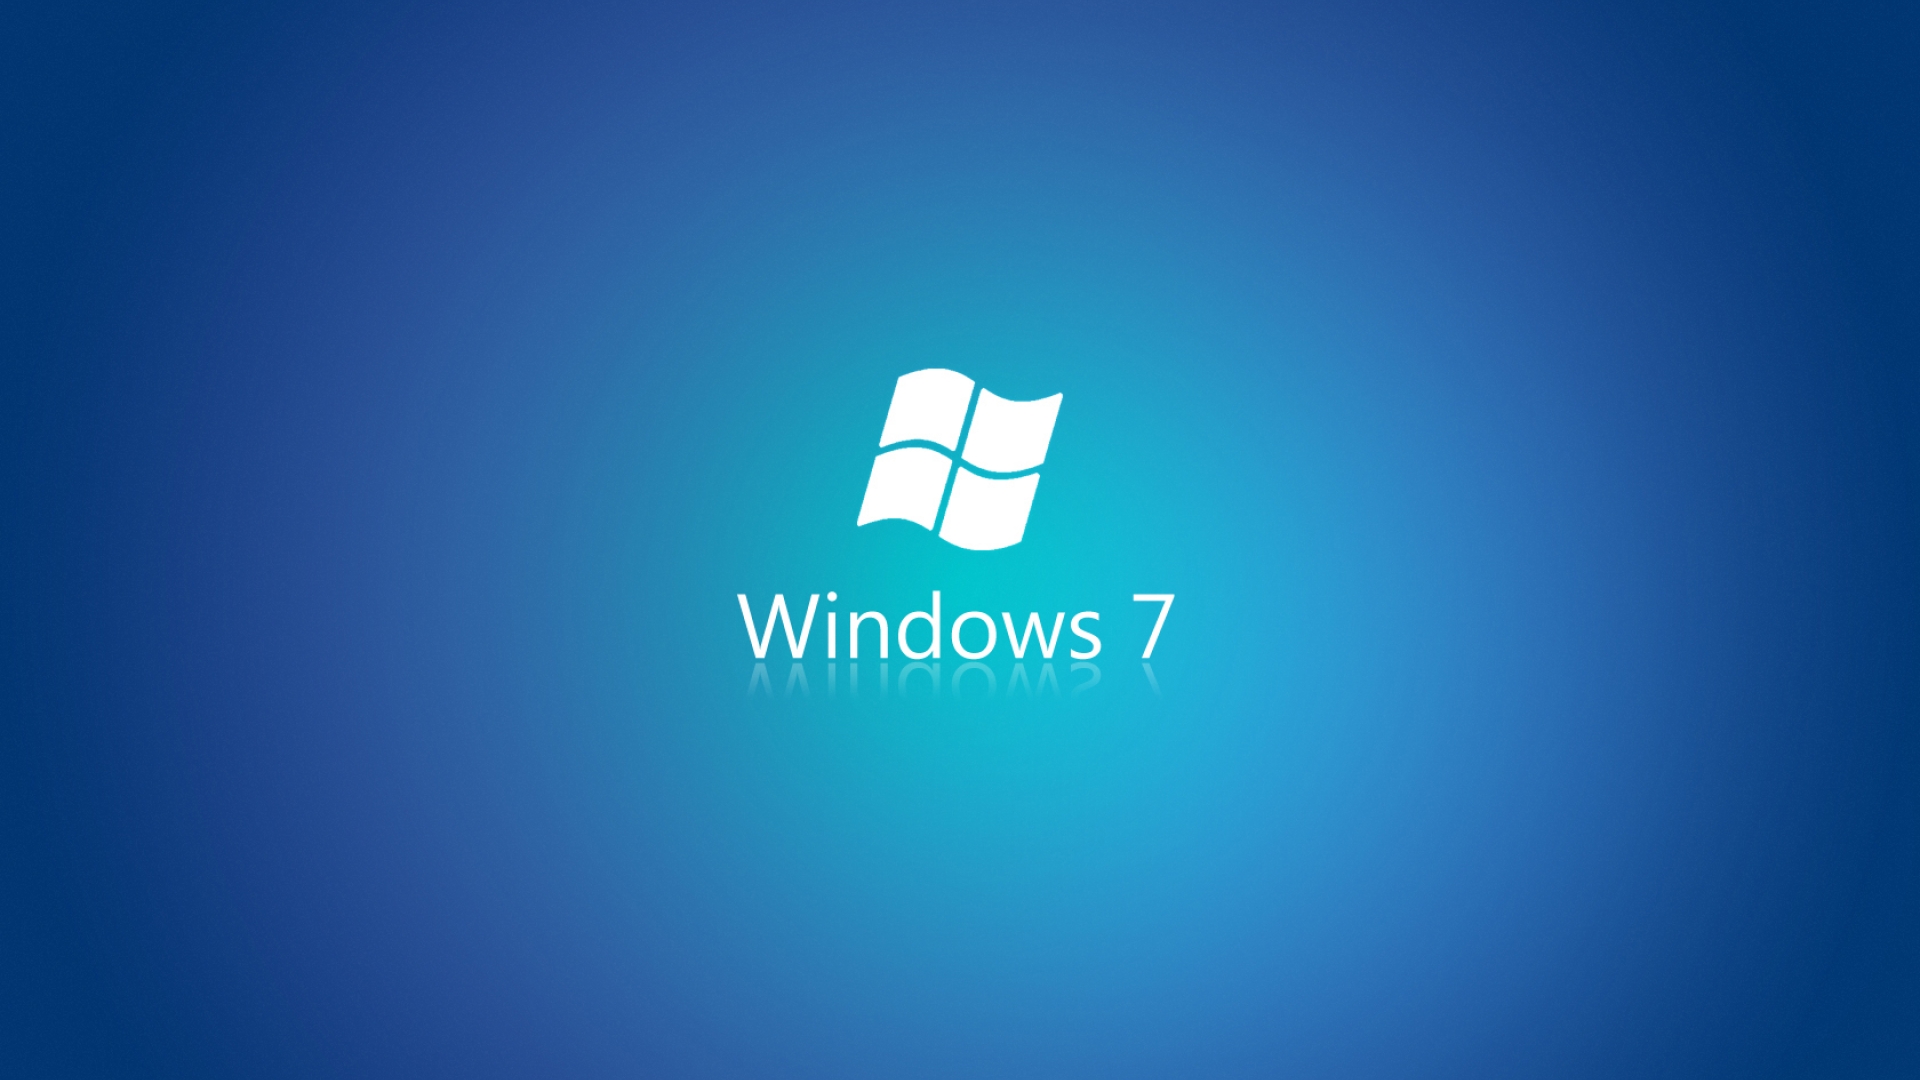 All Windows Logo Submited Image